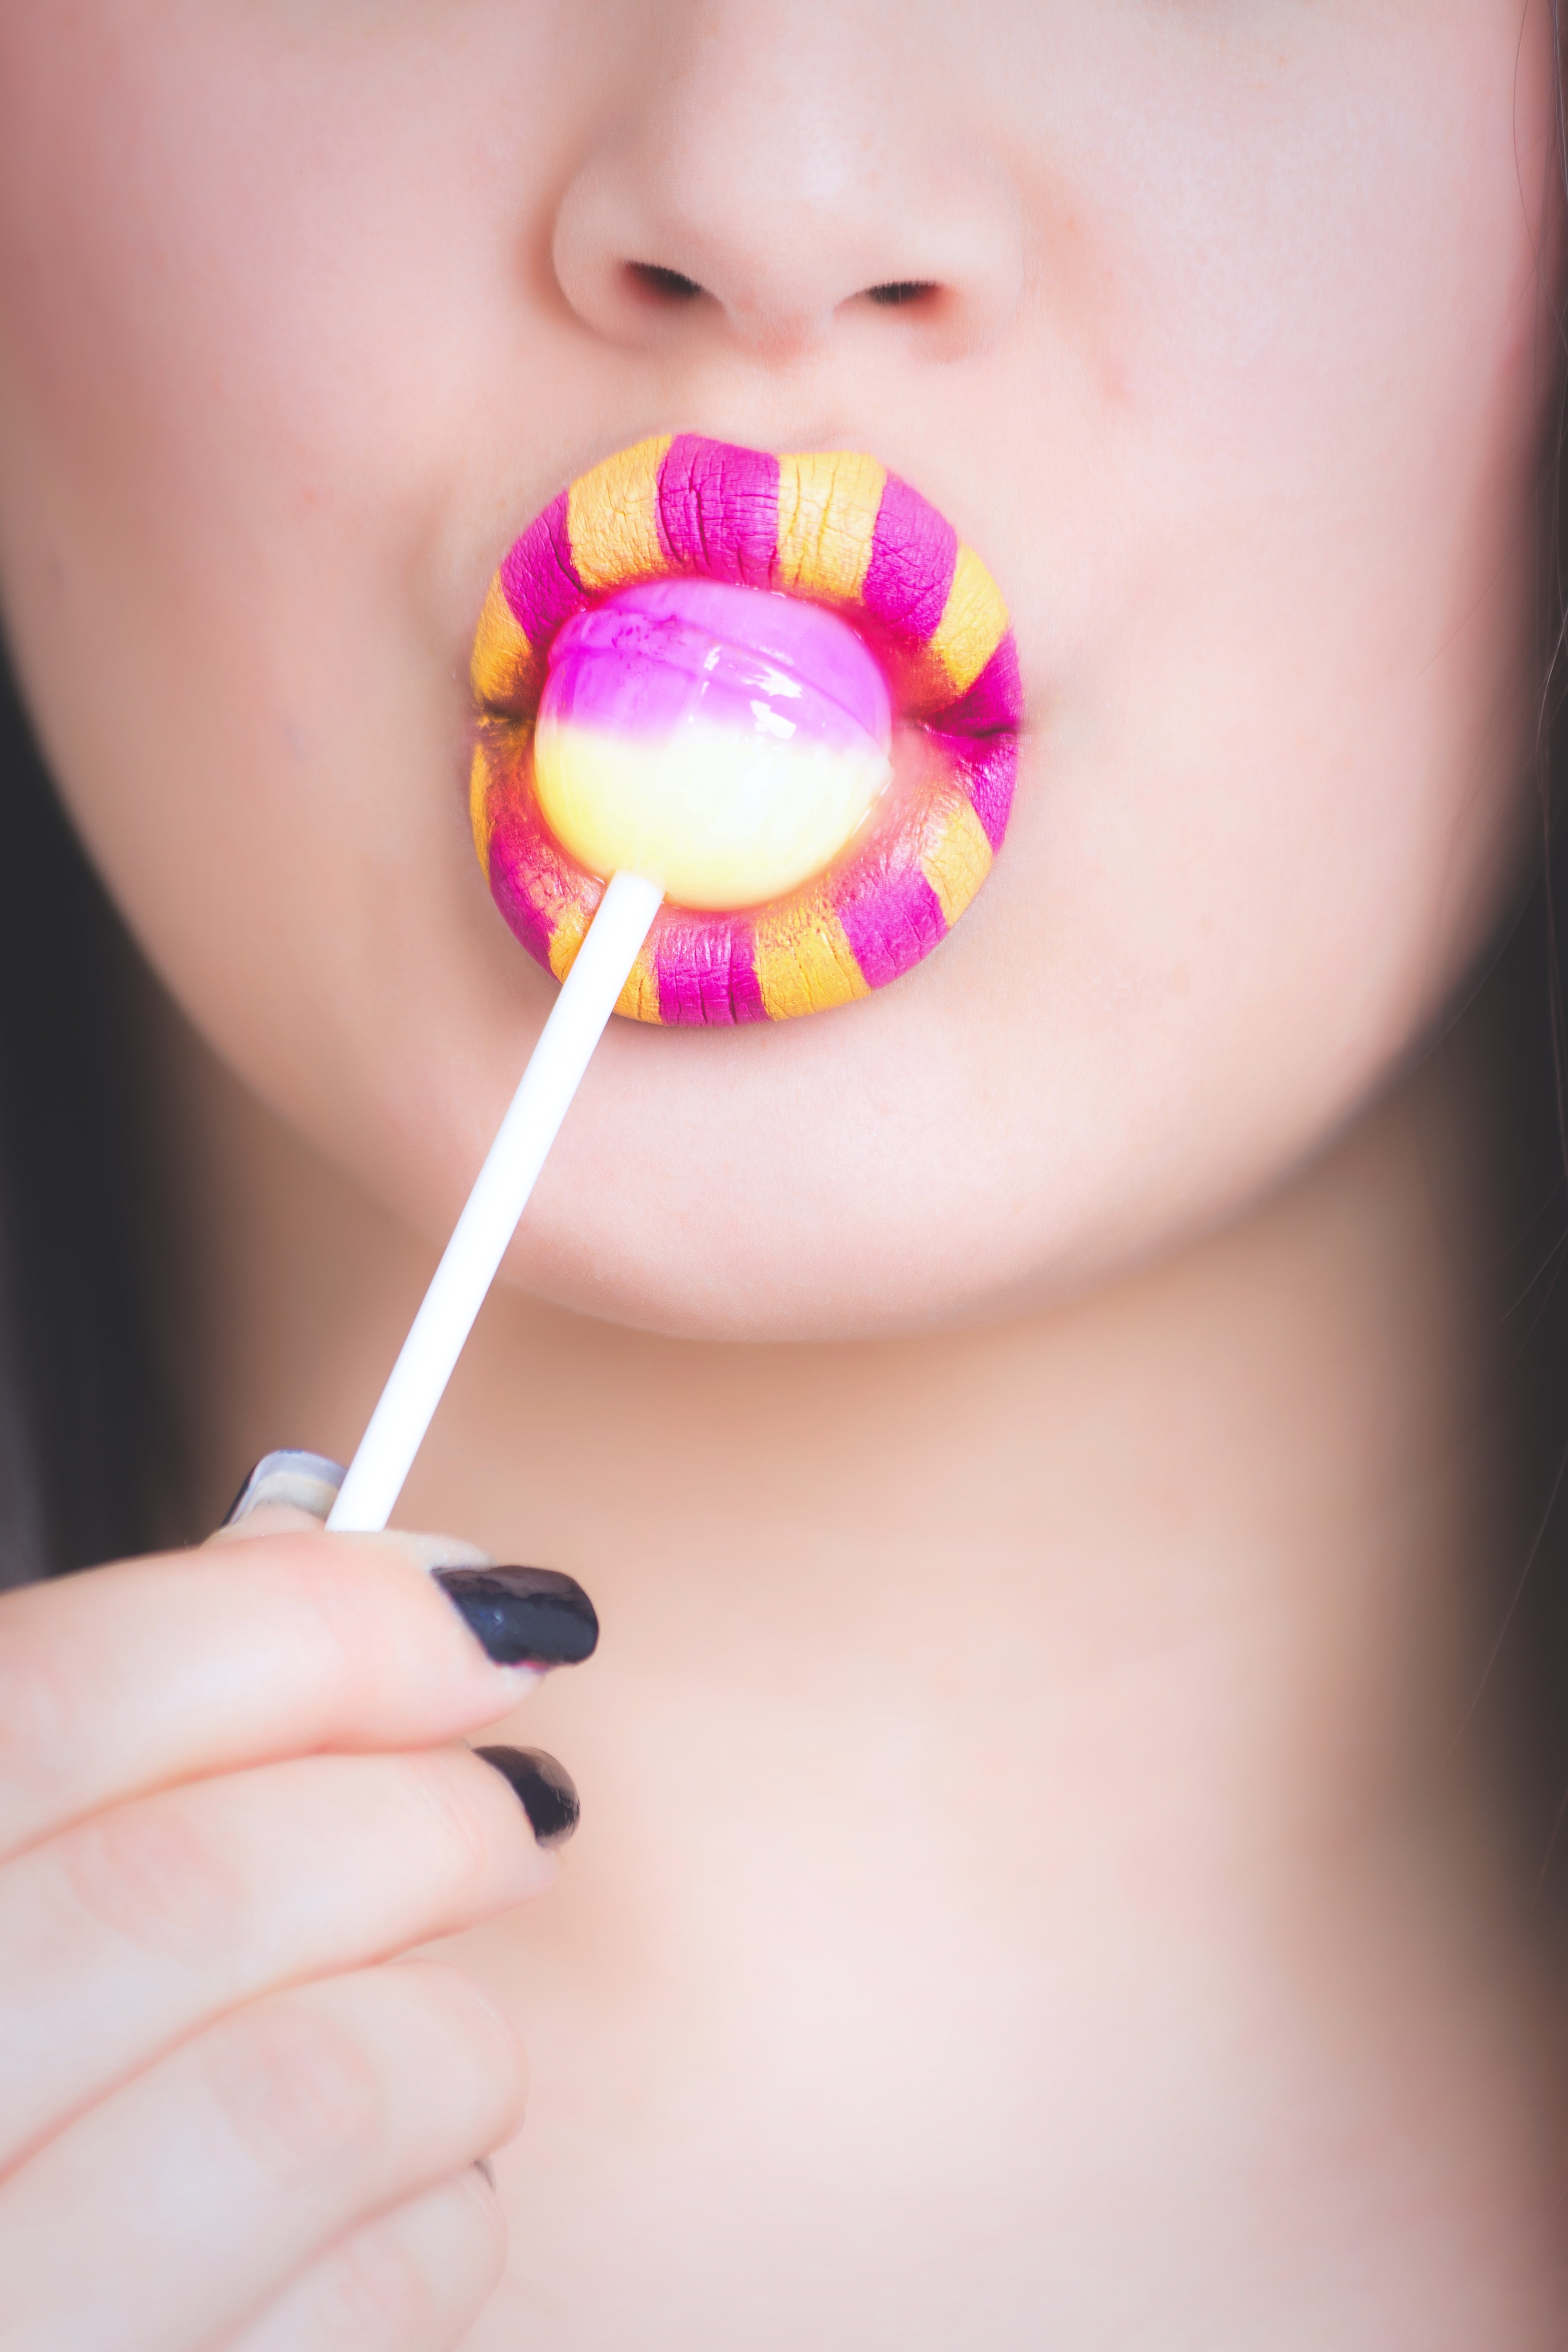 Free Photo Woman Licking Pink And White Lollipop Adorable Lollipop